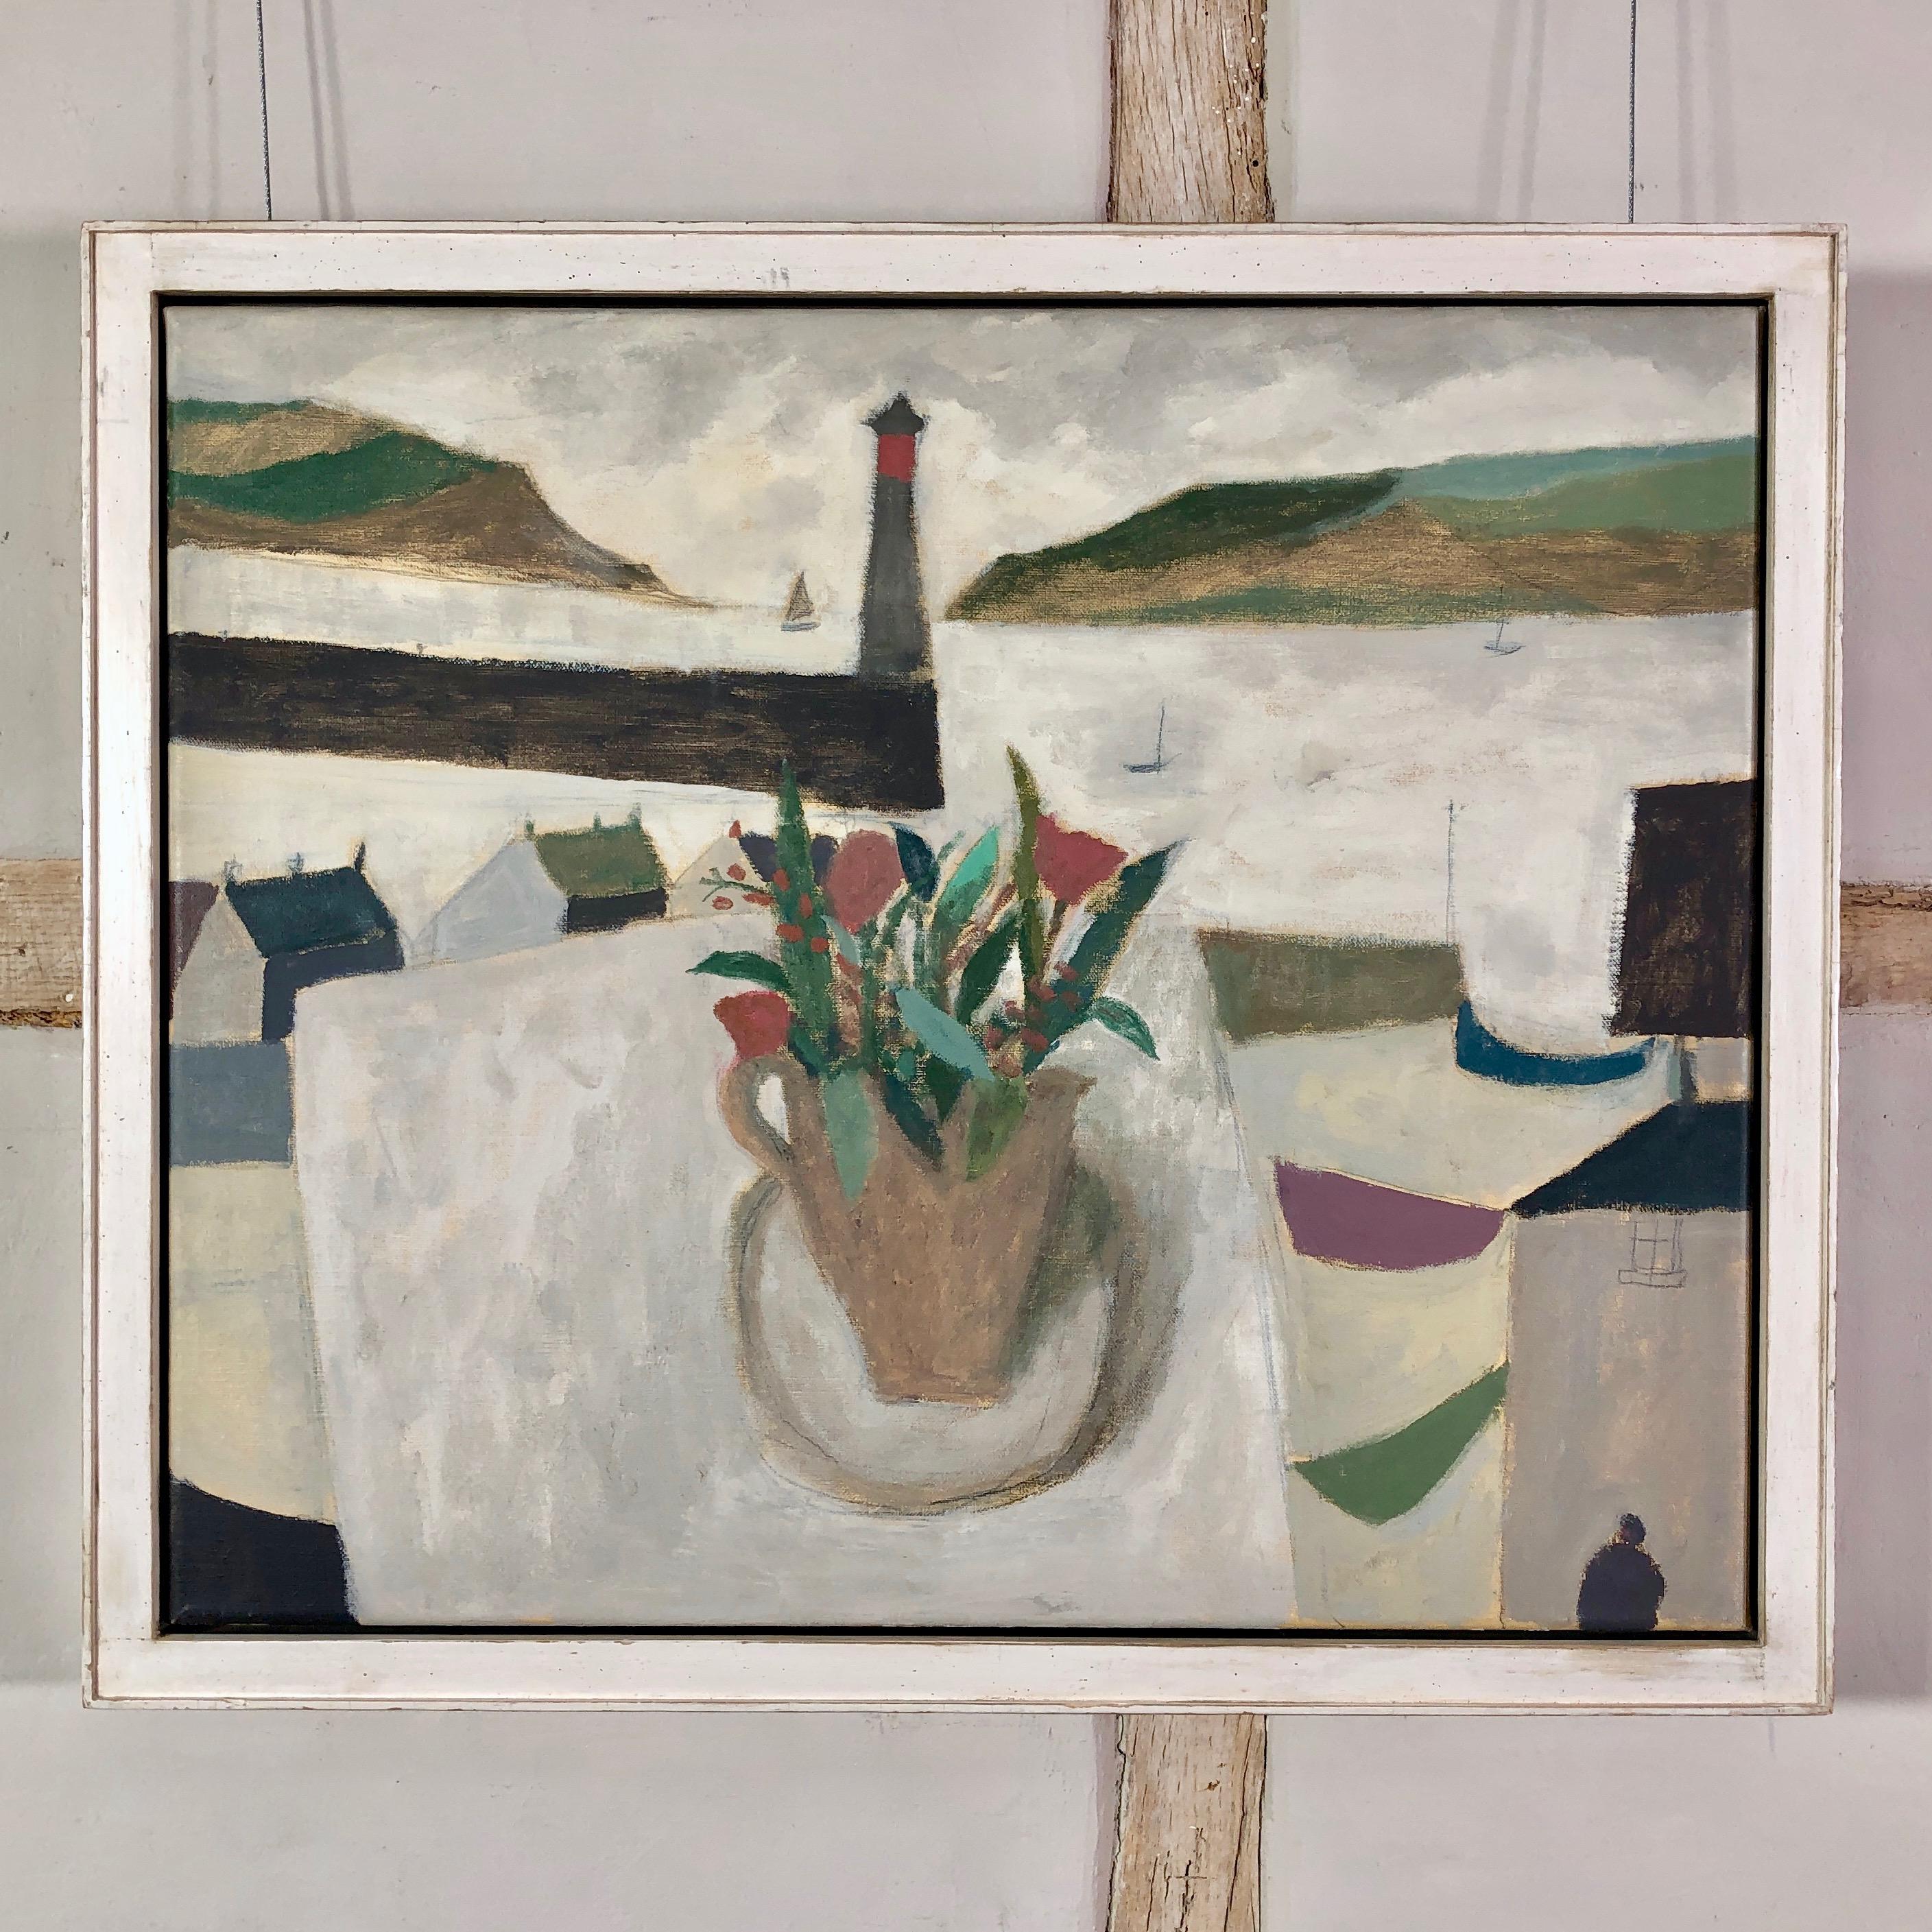 Nicholas Turner, Harbour with Flowers, oil painting. Lighthouse, Still life 1